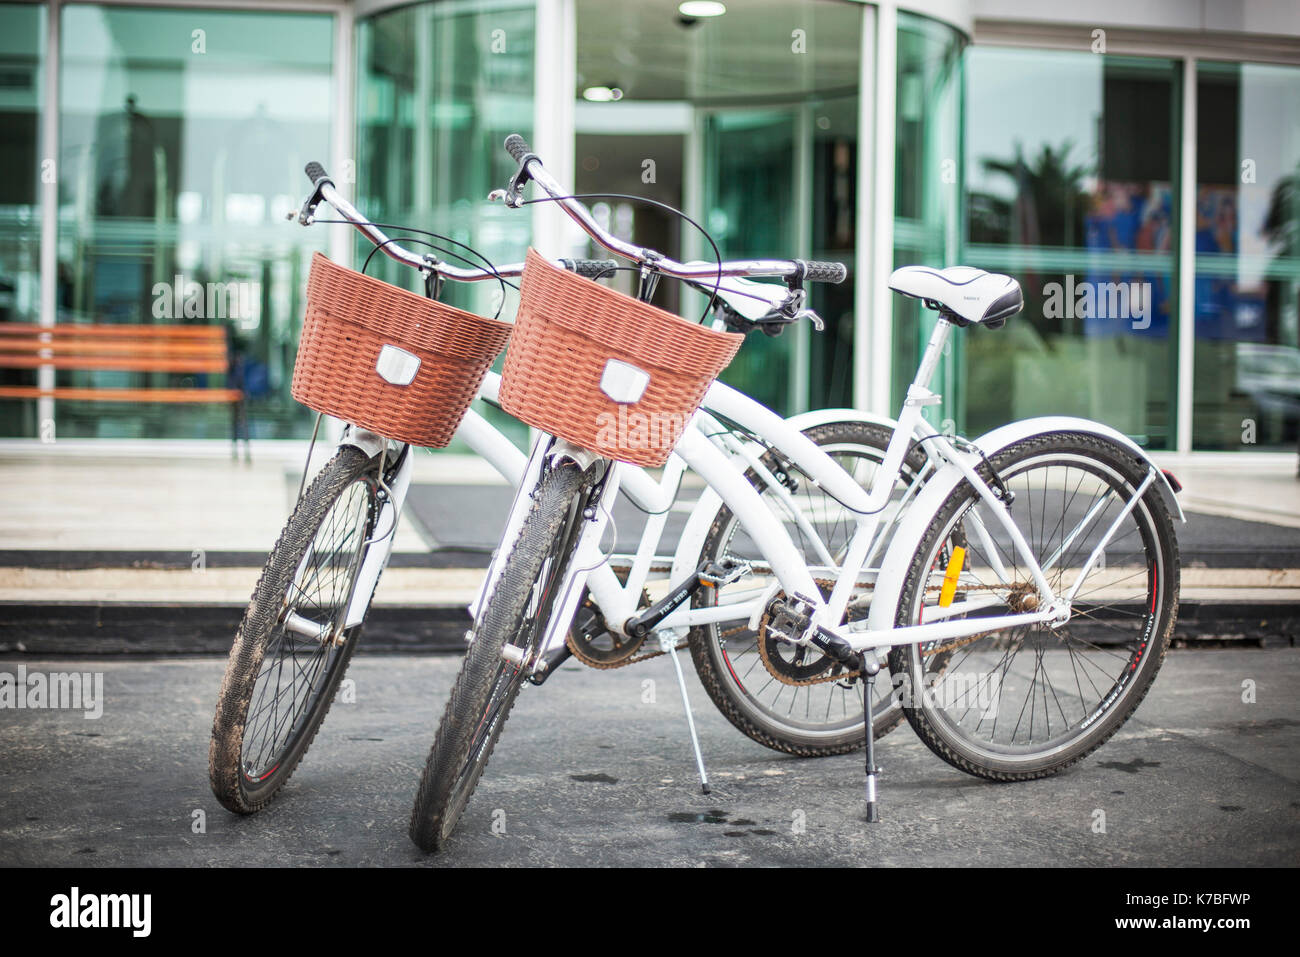 Pair of bicycles parked in front of building Stock Photo